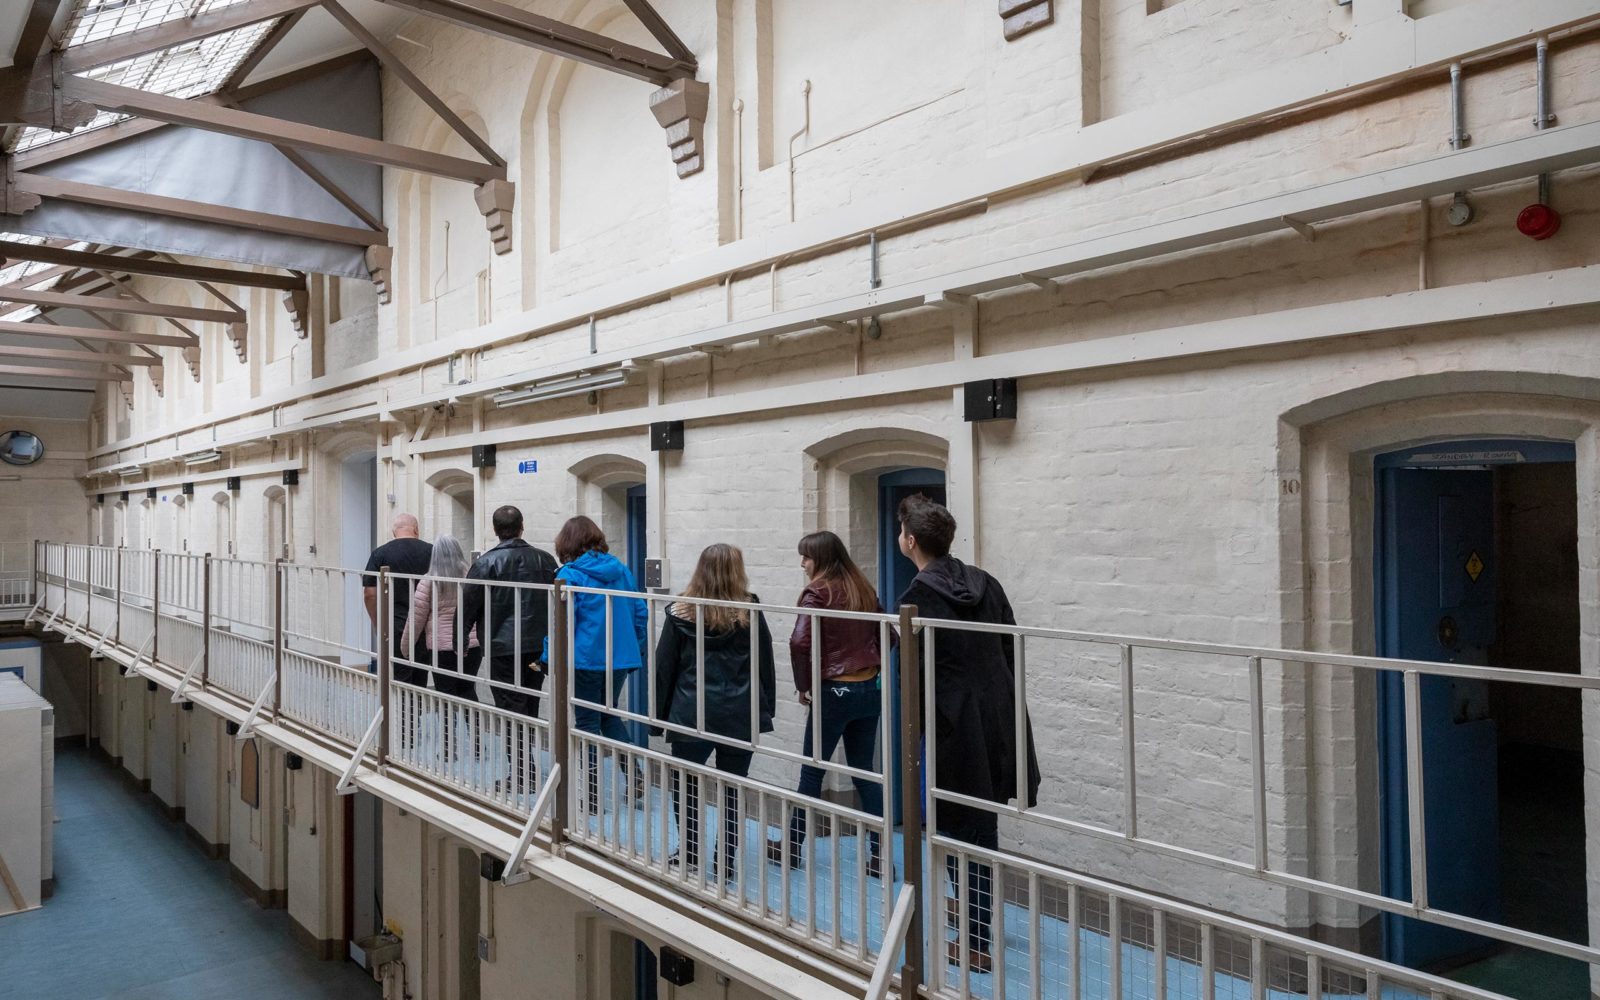 Private Group Events at Shrewsbury Prison